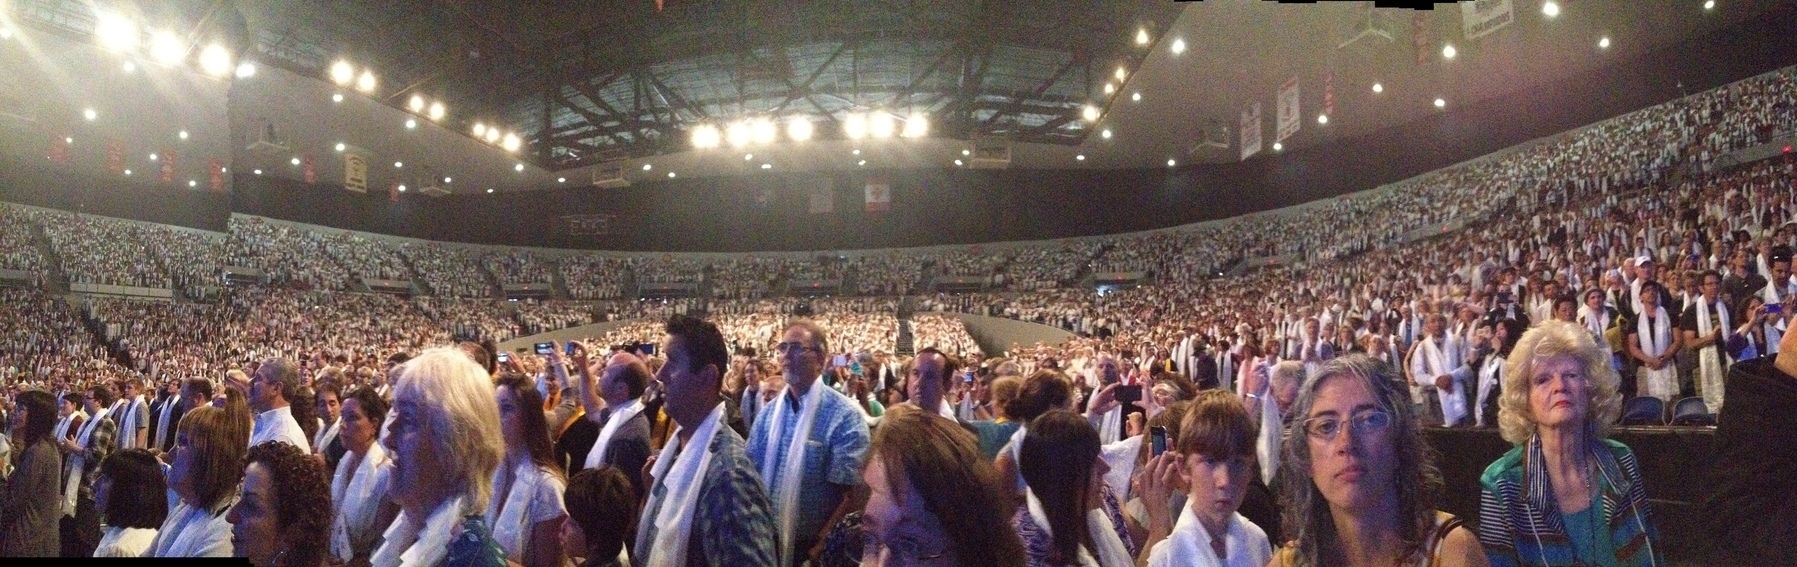 The audience of a large arena welcoming His Holiness the Dalai Lama to Portland. Everyone has Khatags, white silk scarves, around their necks, a traditional Tibetan greeting